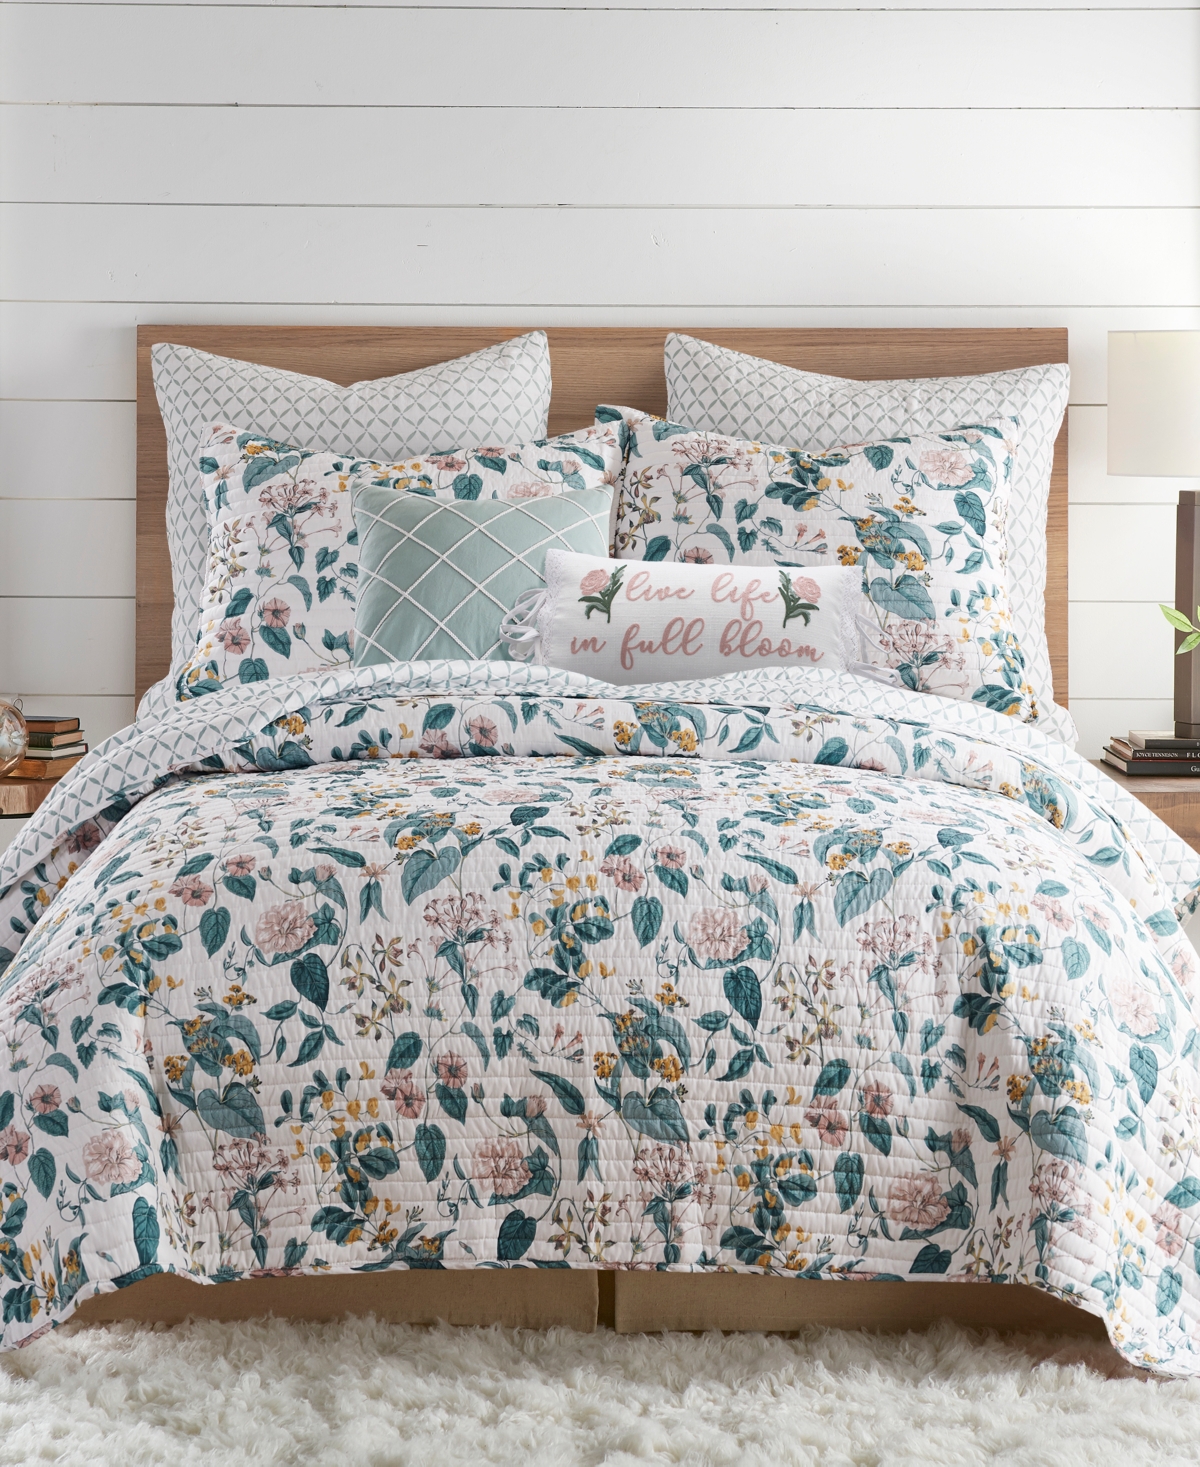 Levtex Verity Reversible 3-pc. Quilt Set, King/california King In Mint